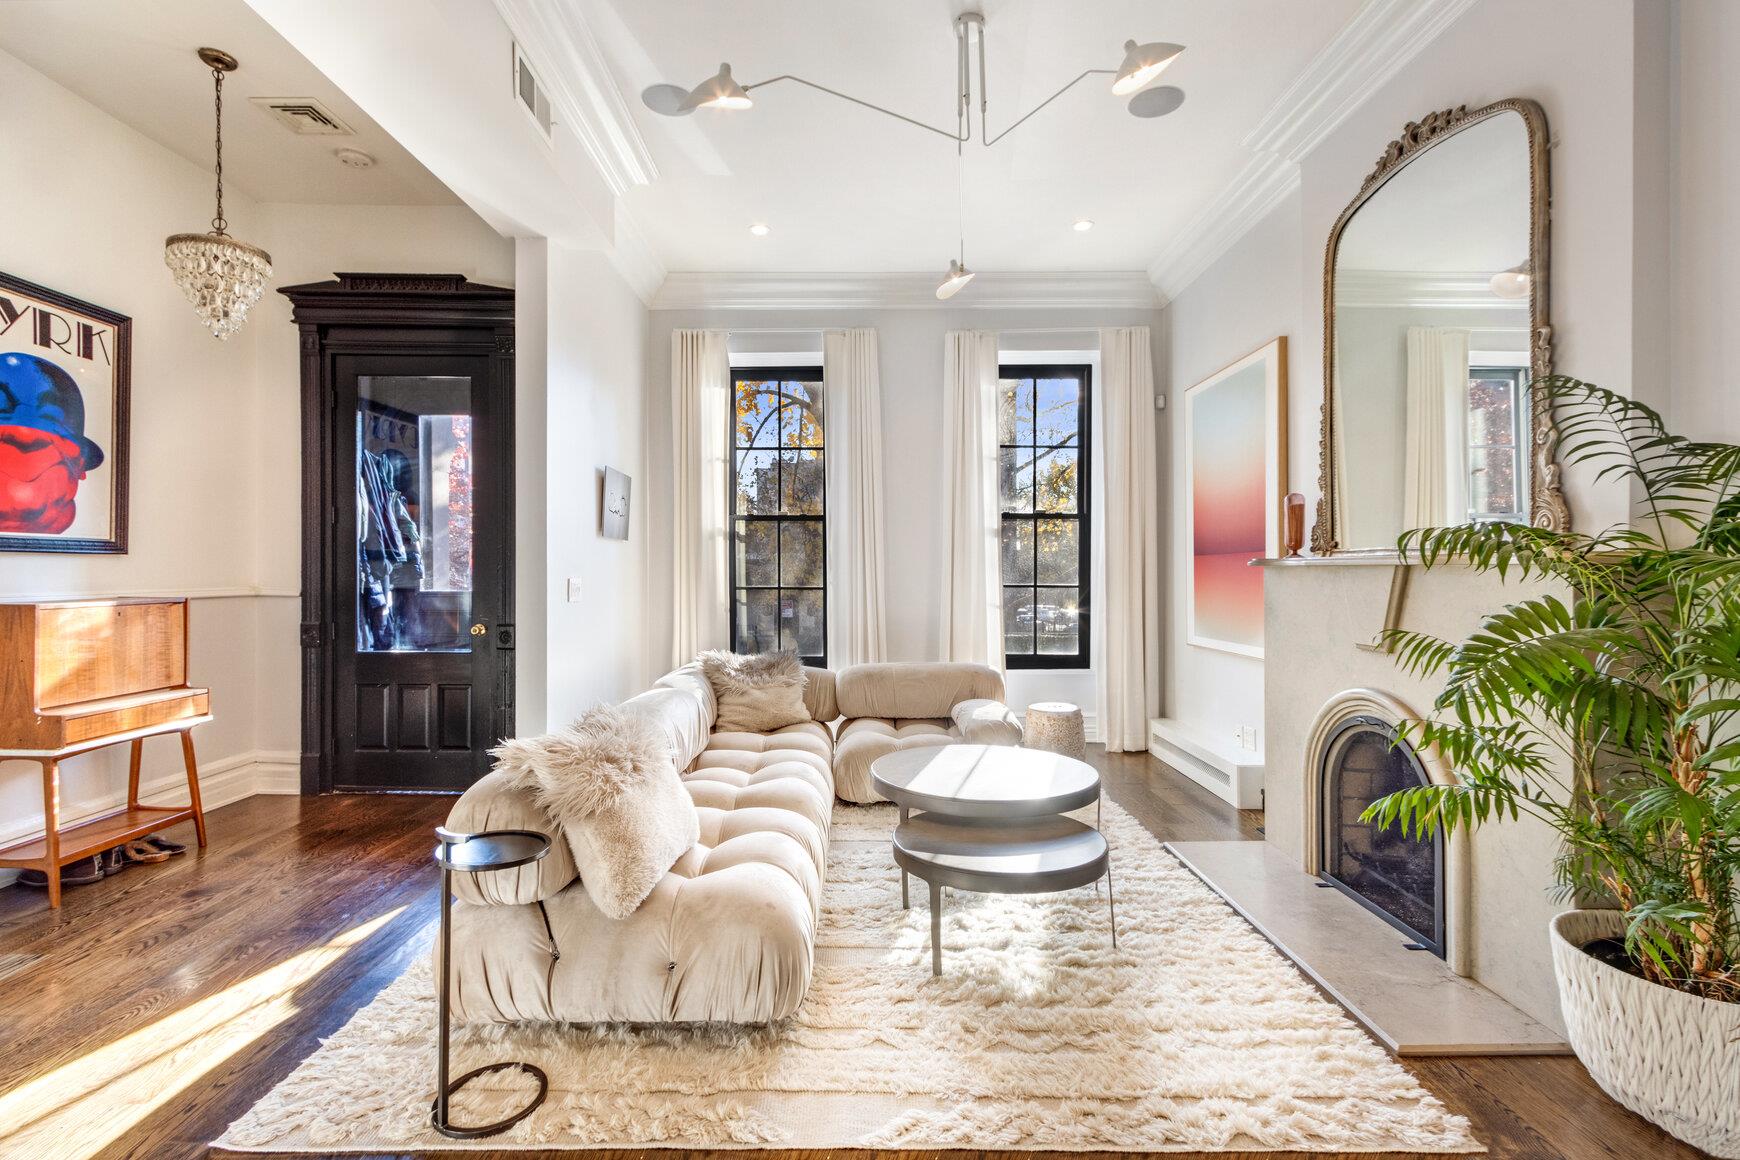 49 2nd Place 1, Carroll Gardens, Brooklyn, New York - 5 Bedrooms  
3.5 Bathrooms  
7 Rooms - 